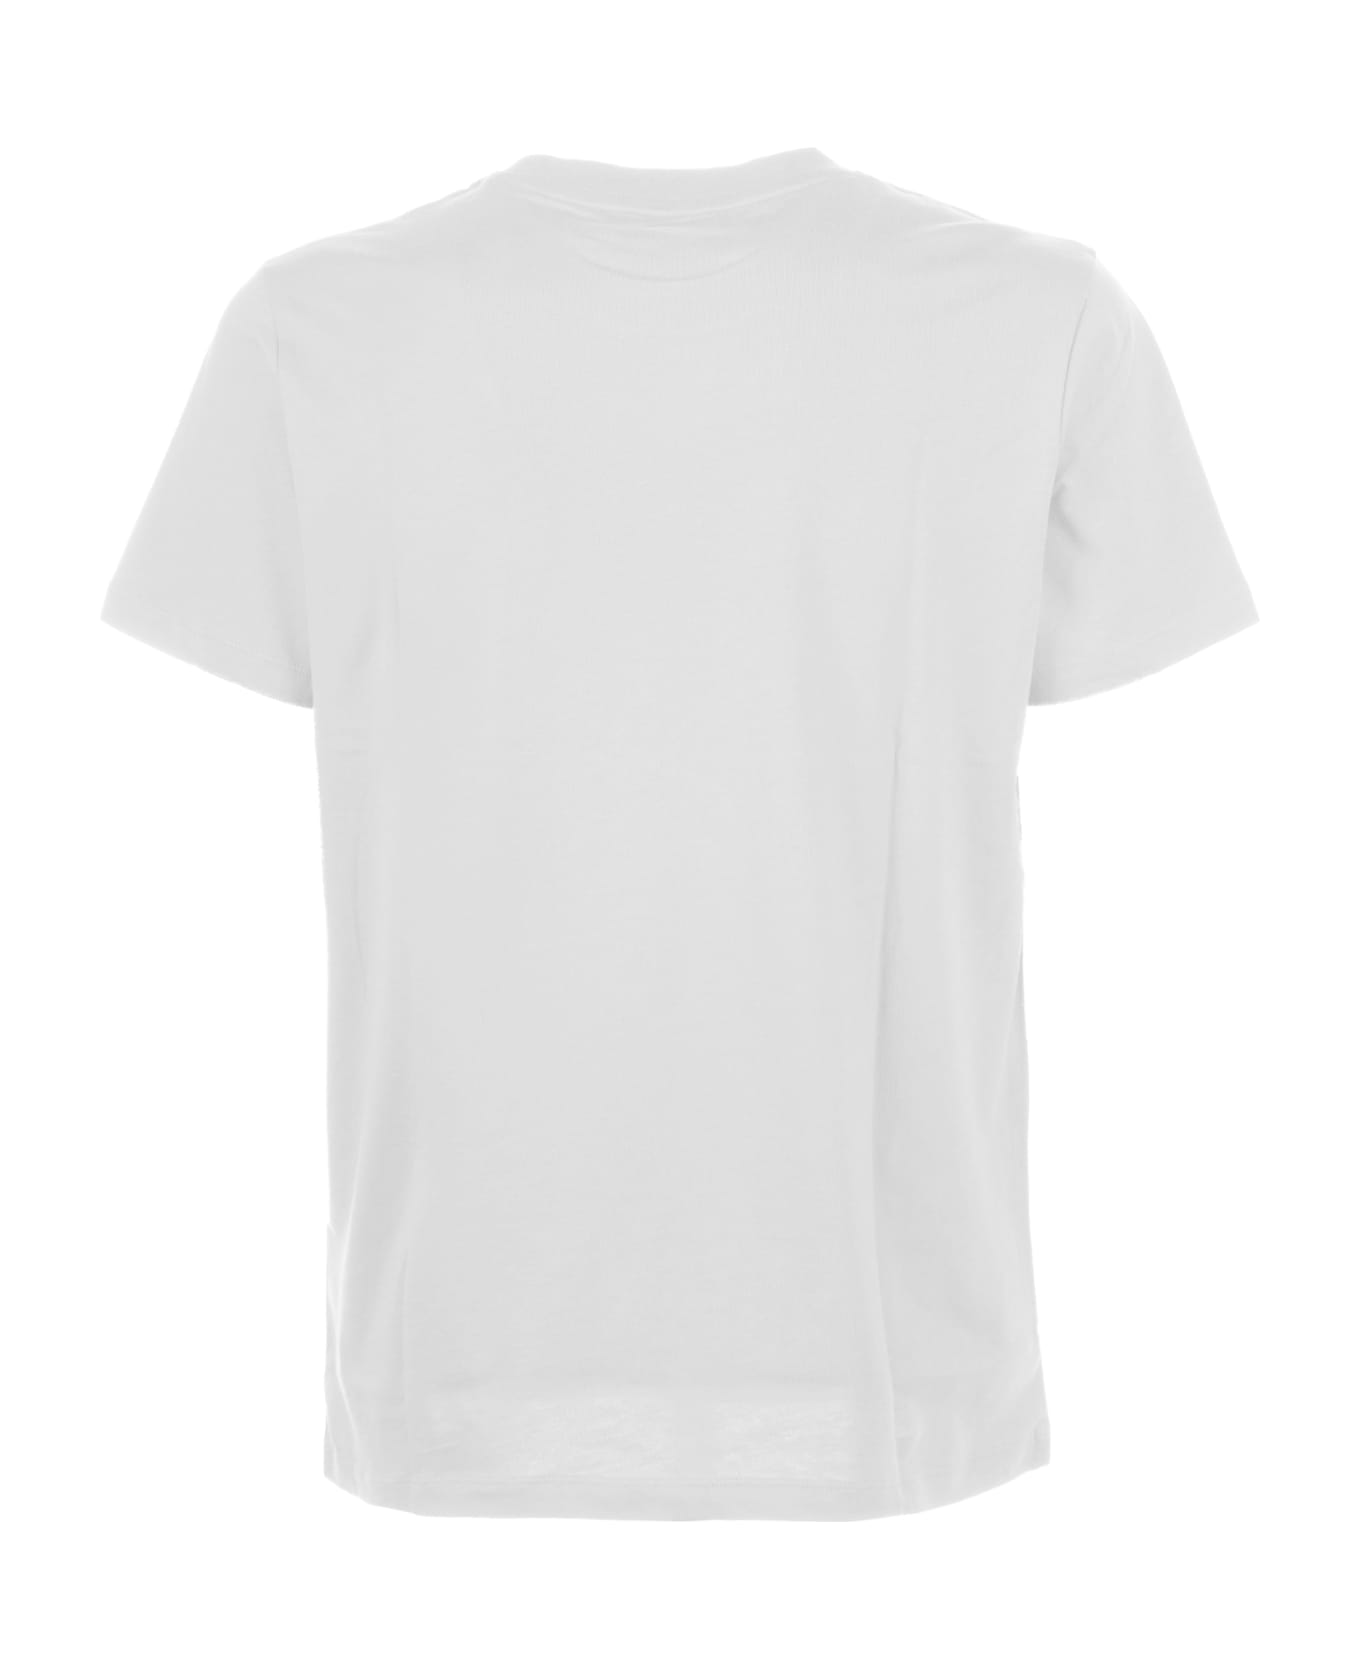 Peuterey White T-shirt With Pocket - BIANCO シャツ